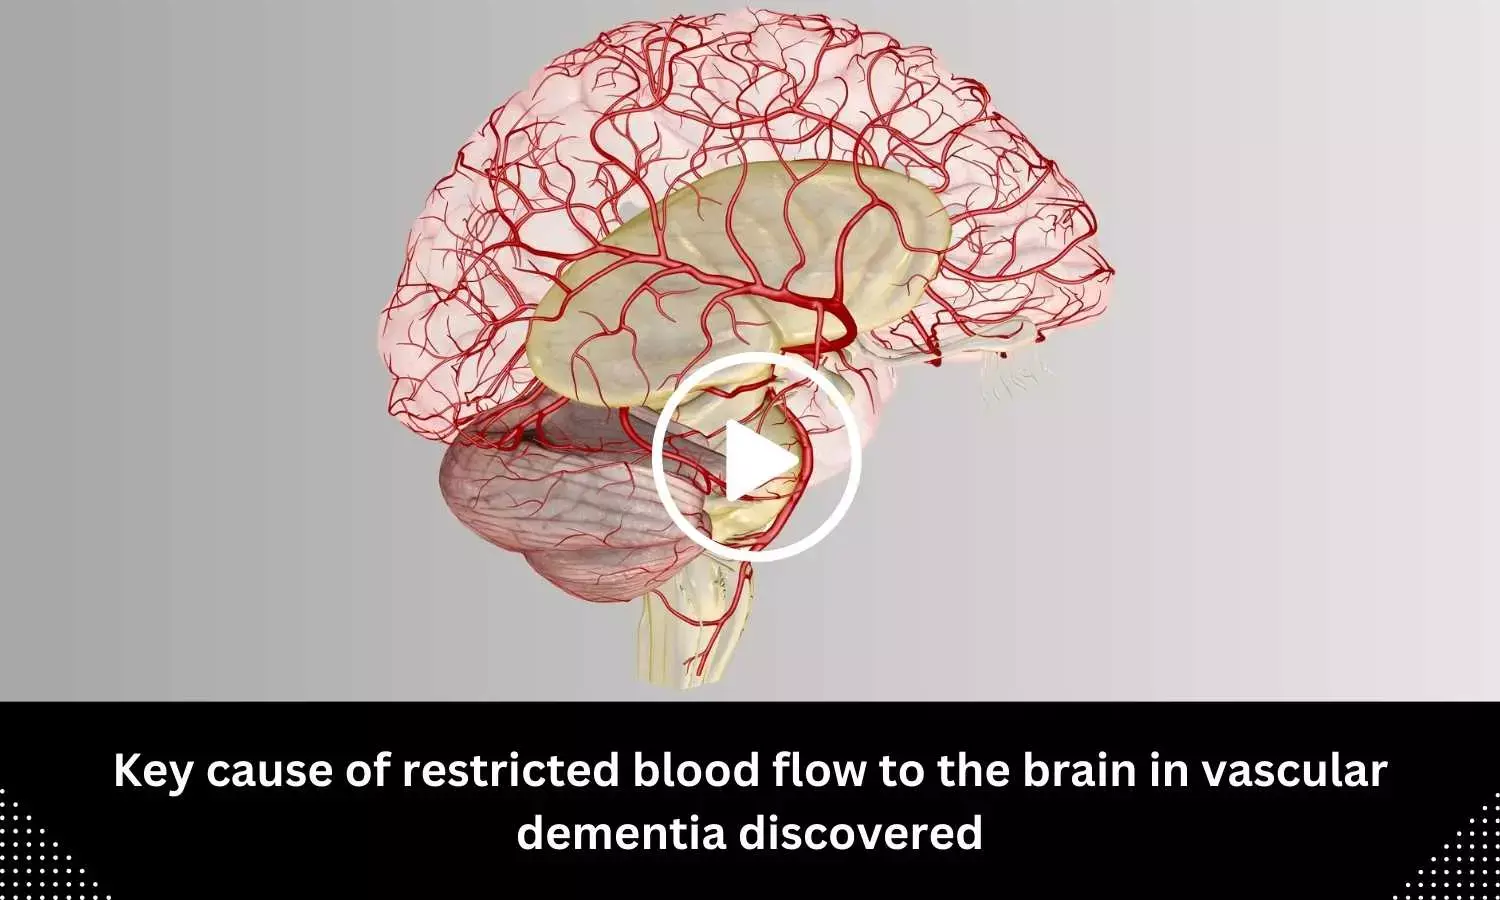 The Dysautonomia Project - Brain fog, or mental clouding, occurs when  there is not an ideal amount of blood flow to the cerebral cortex. This  lower blood flow causes difficulties with concentrating